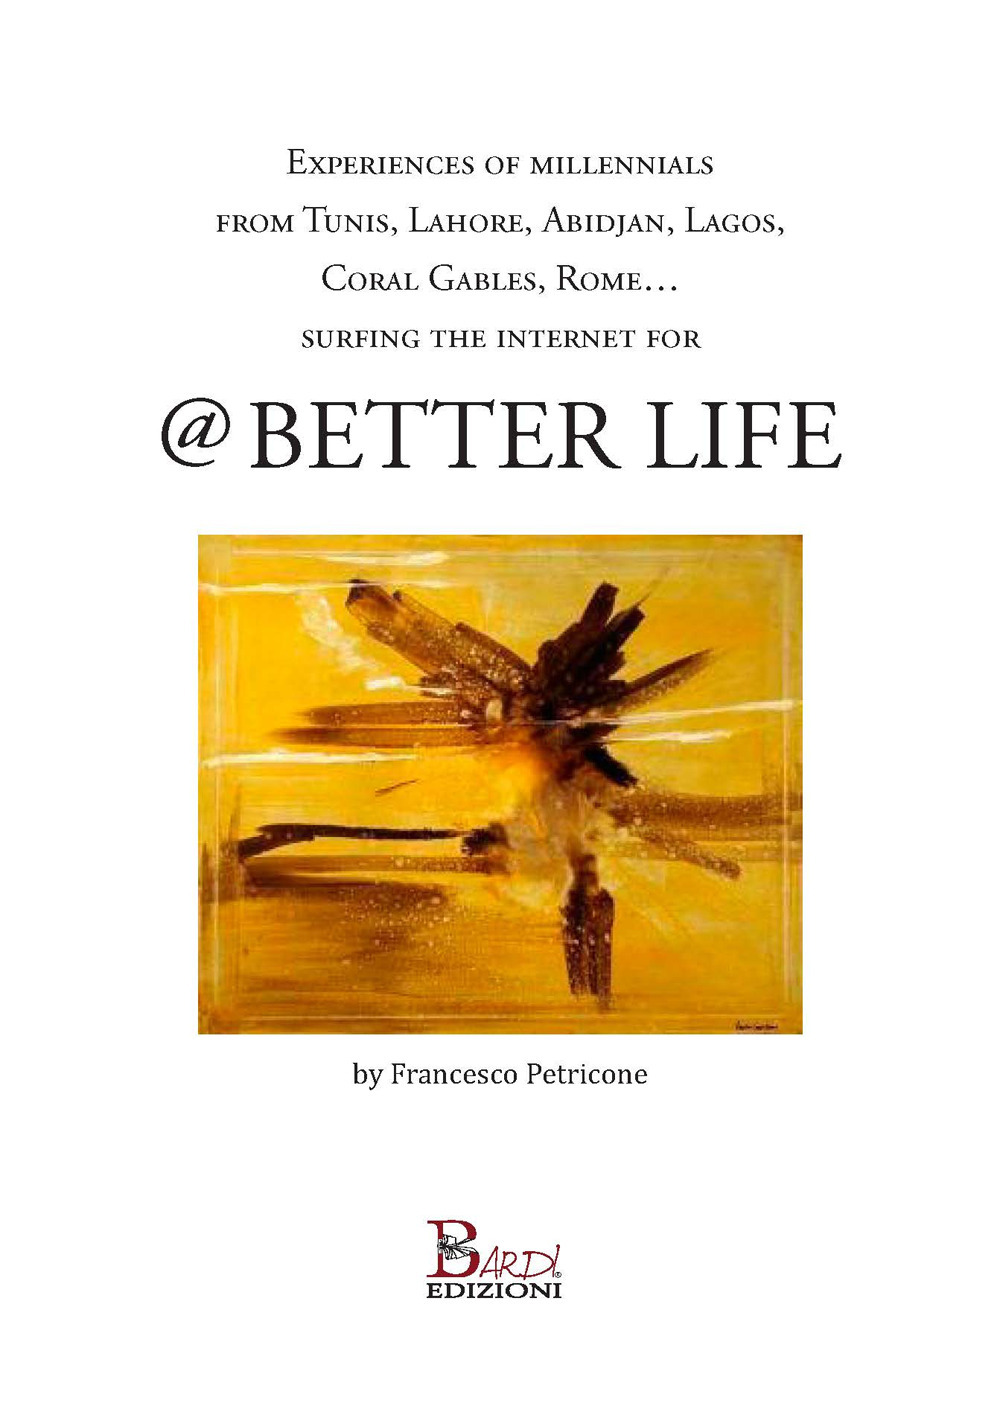 Experience of millennials from Tunis, Lahore, Abidjan, Lagos, Coral Gables, Rome...for @ better life